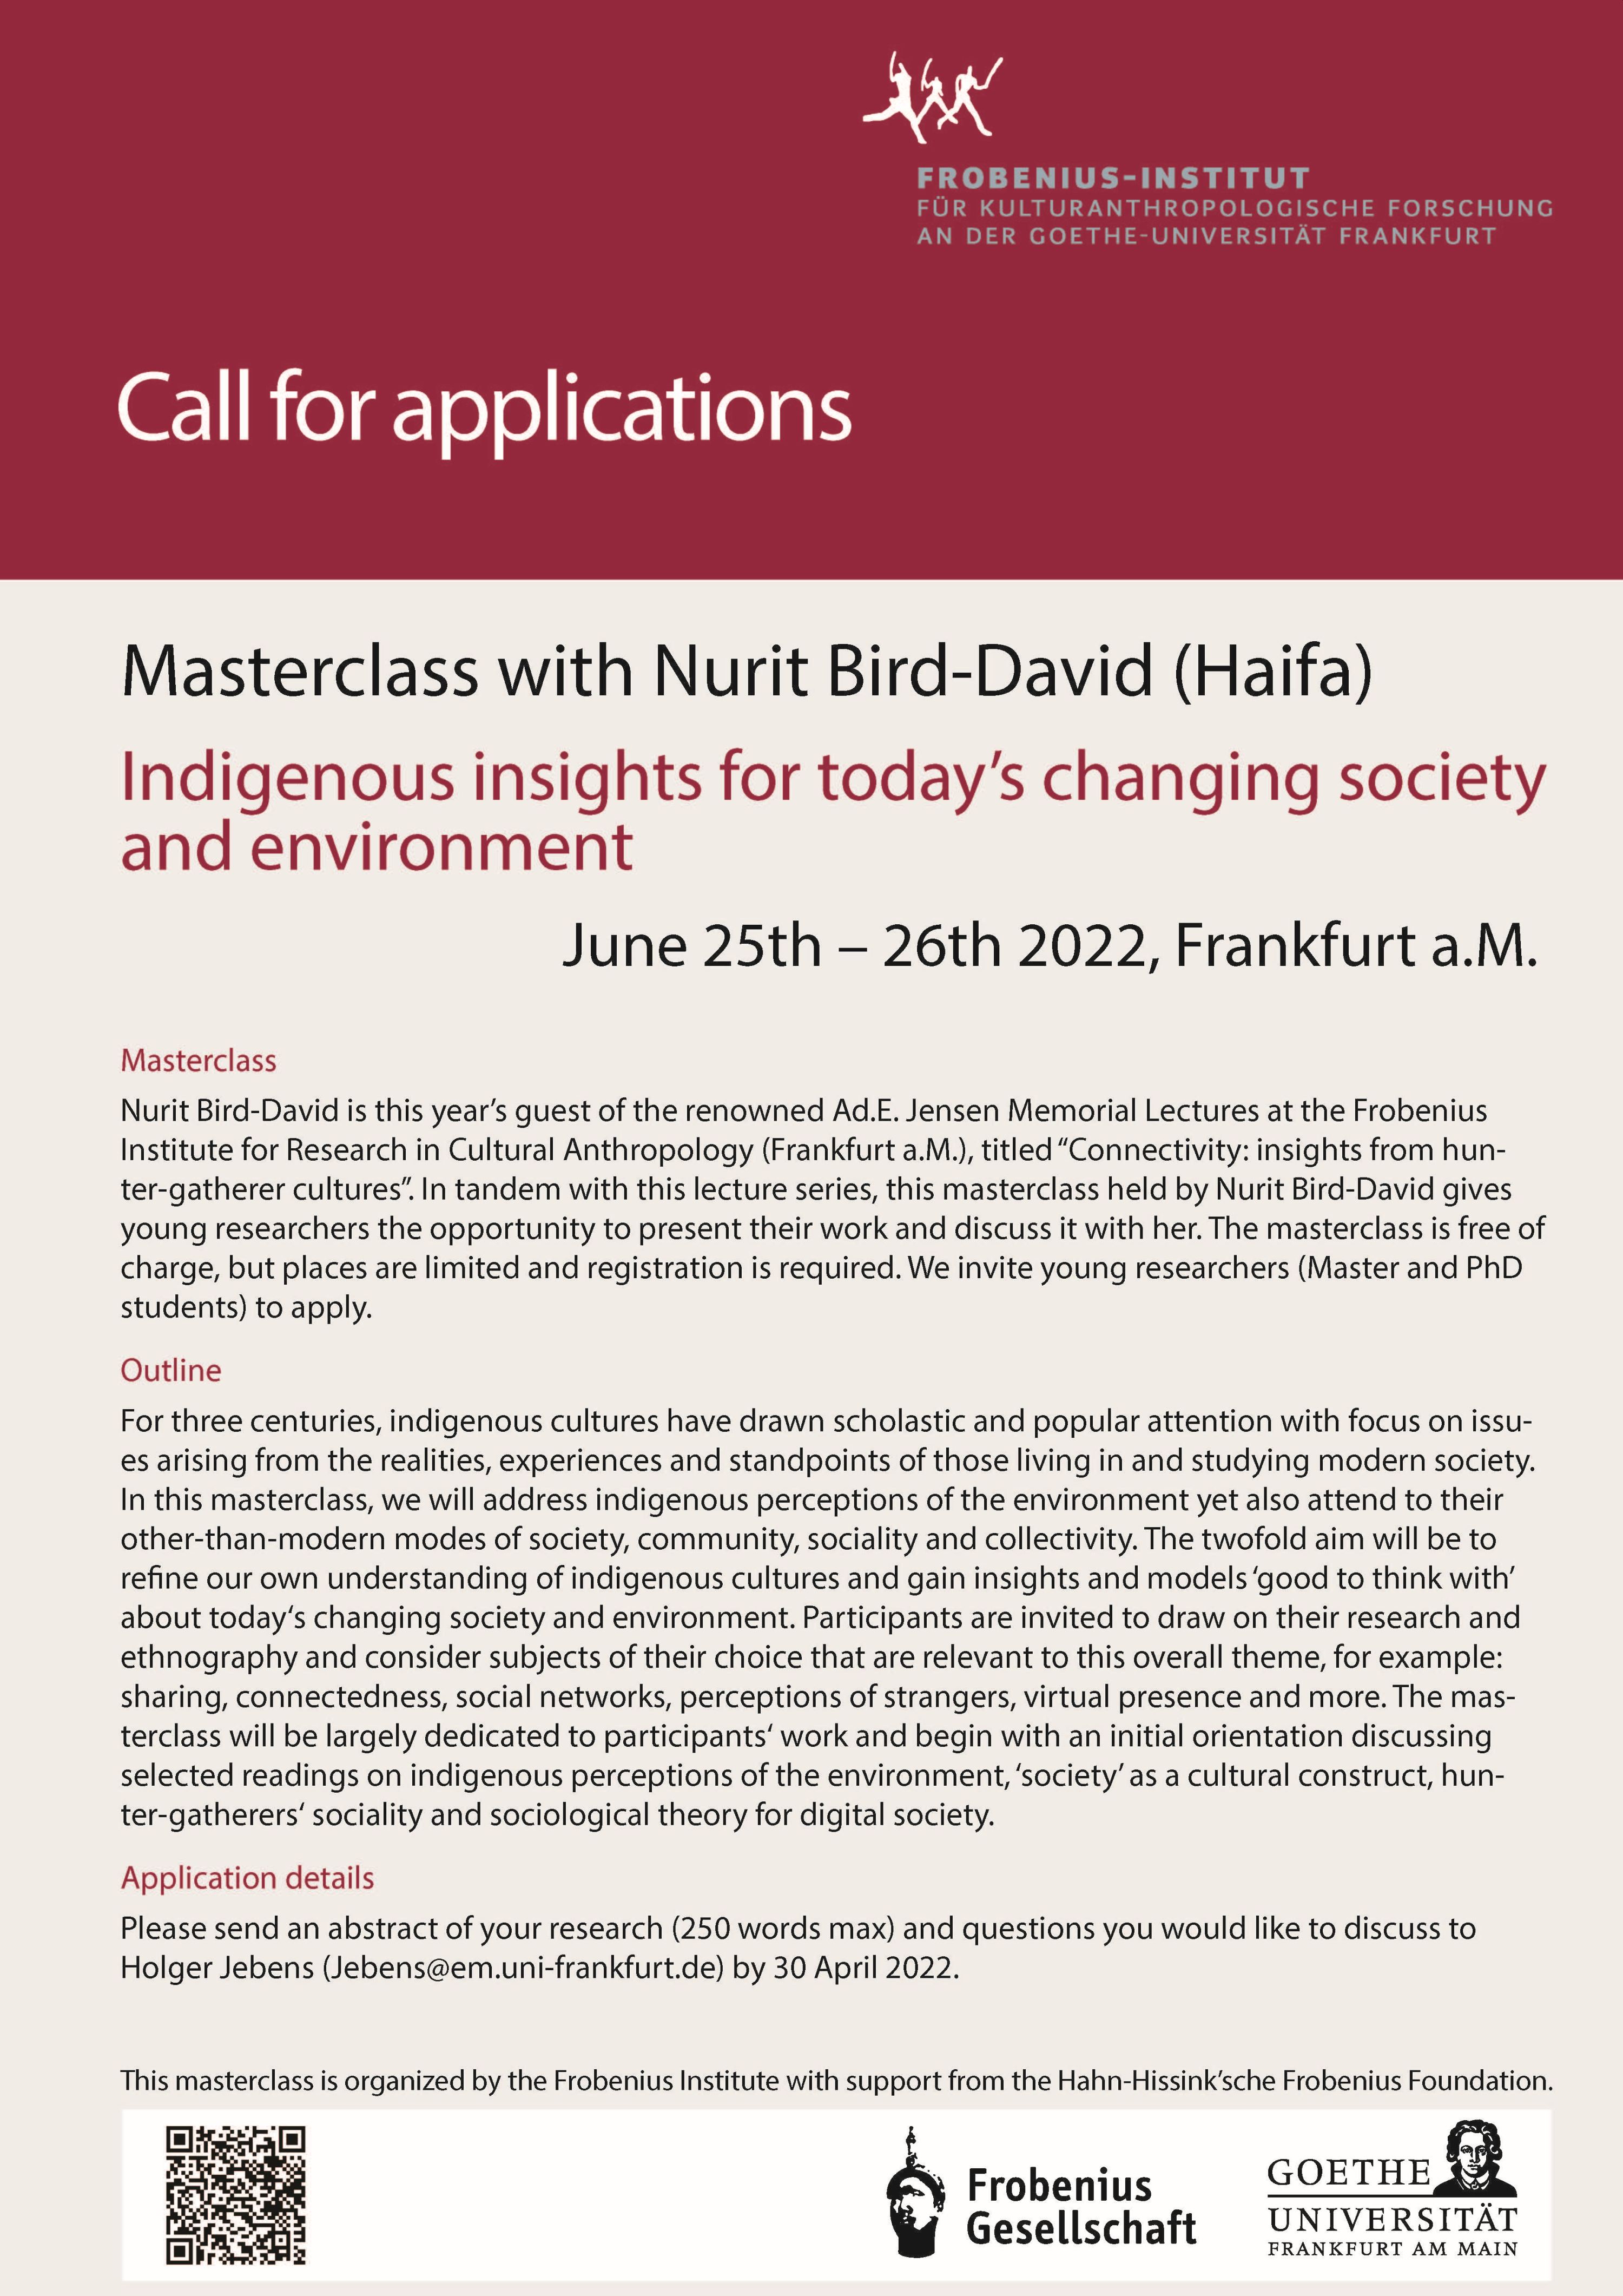 Call for Applications: Masterclass 2022 with Prof. Dr. Nurit Bird-David